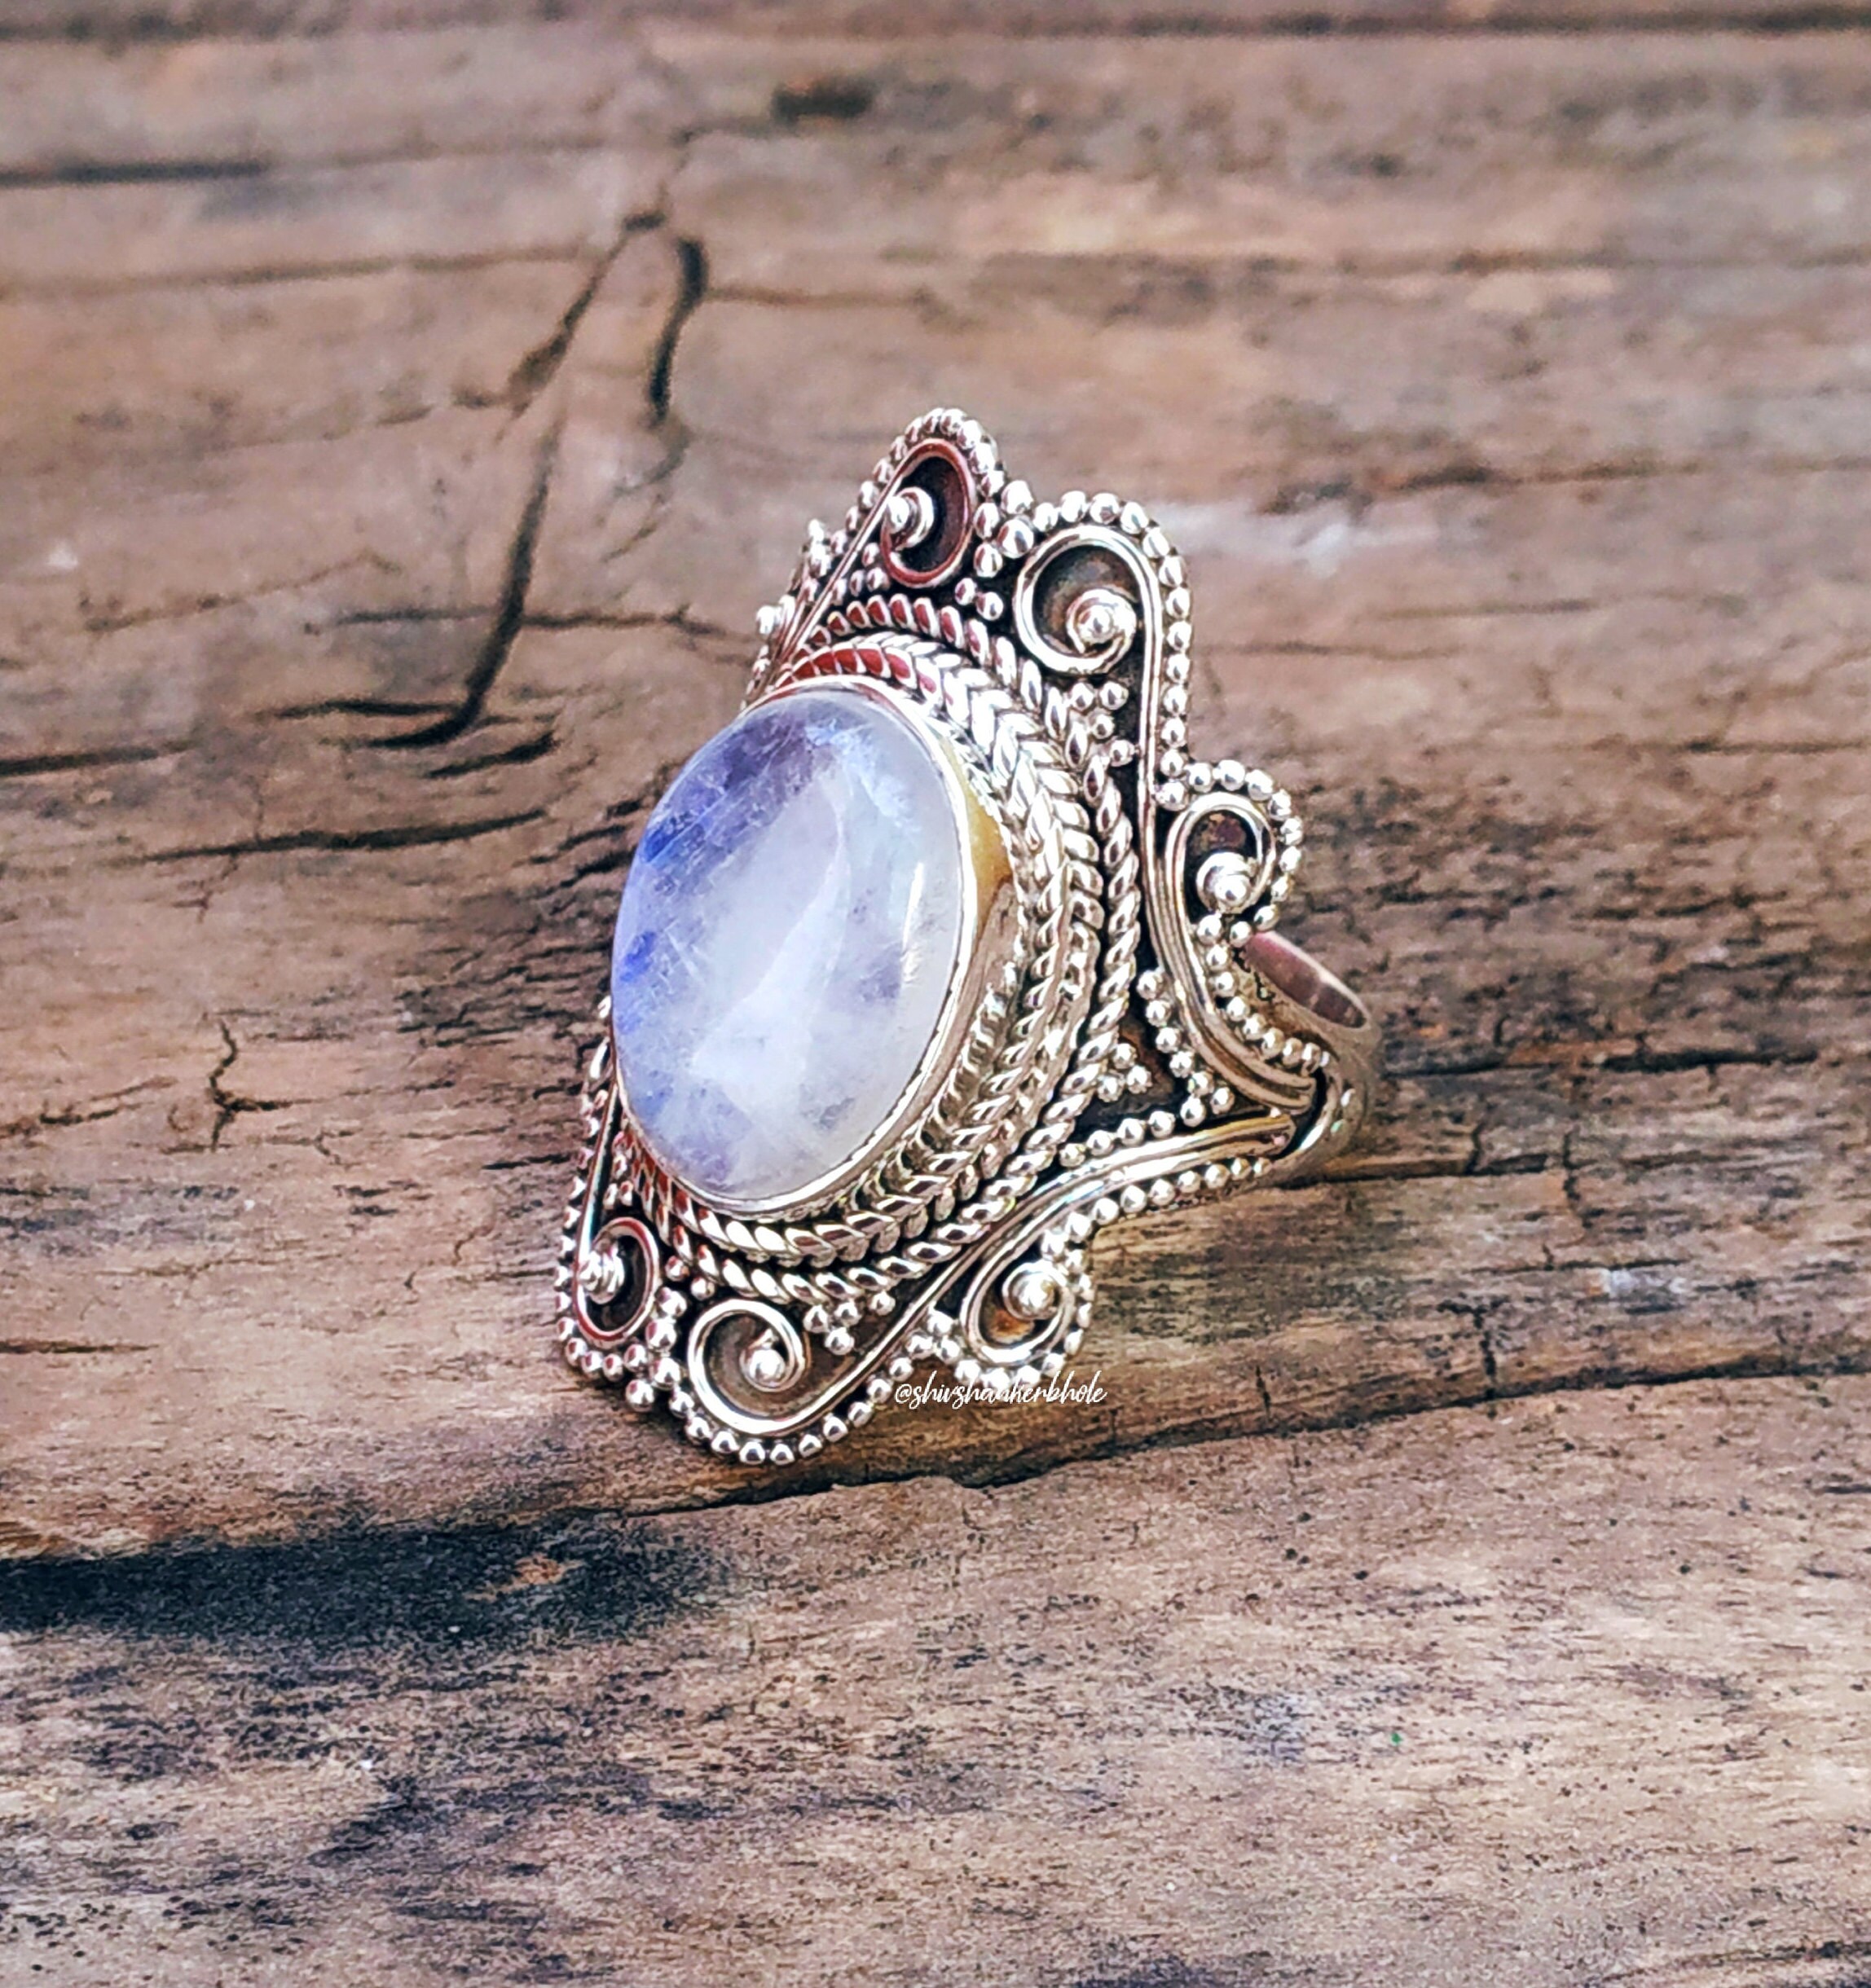 Moonstone Ring 92.5% Silver Ring Statement Ring Oval Stone - Etsy